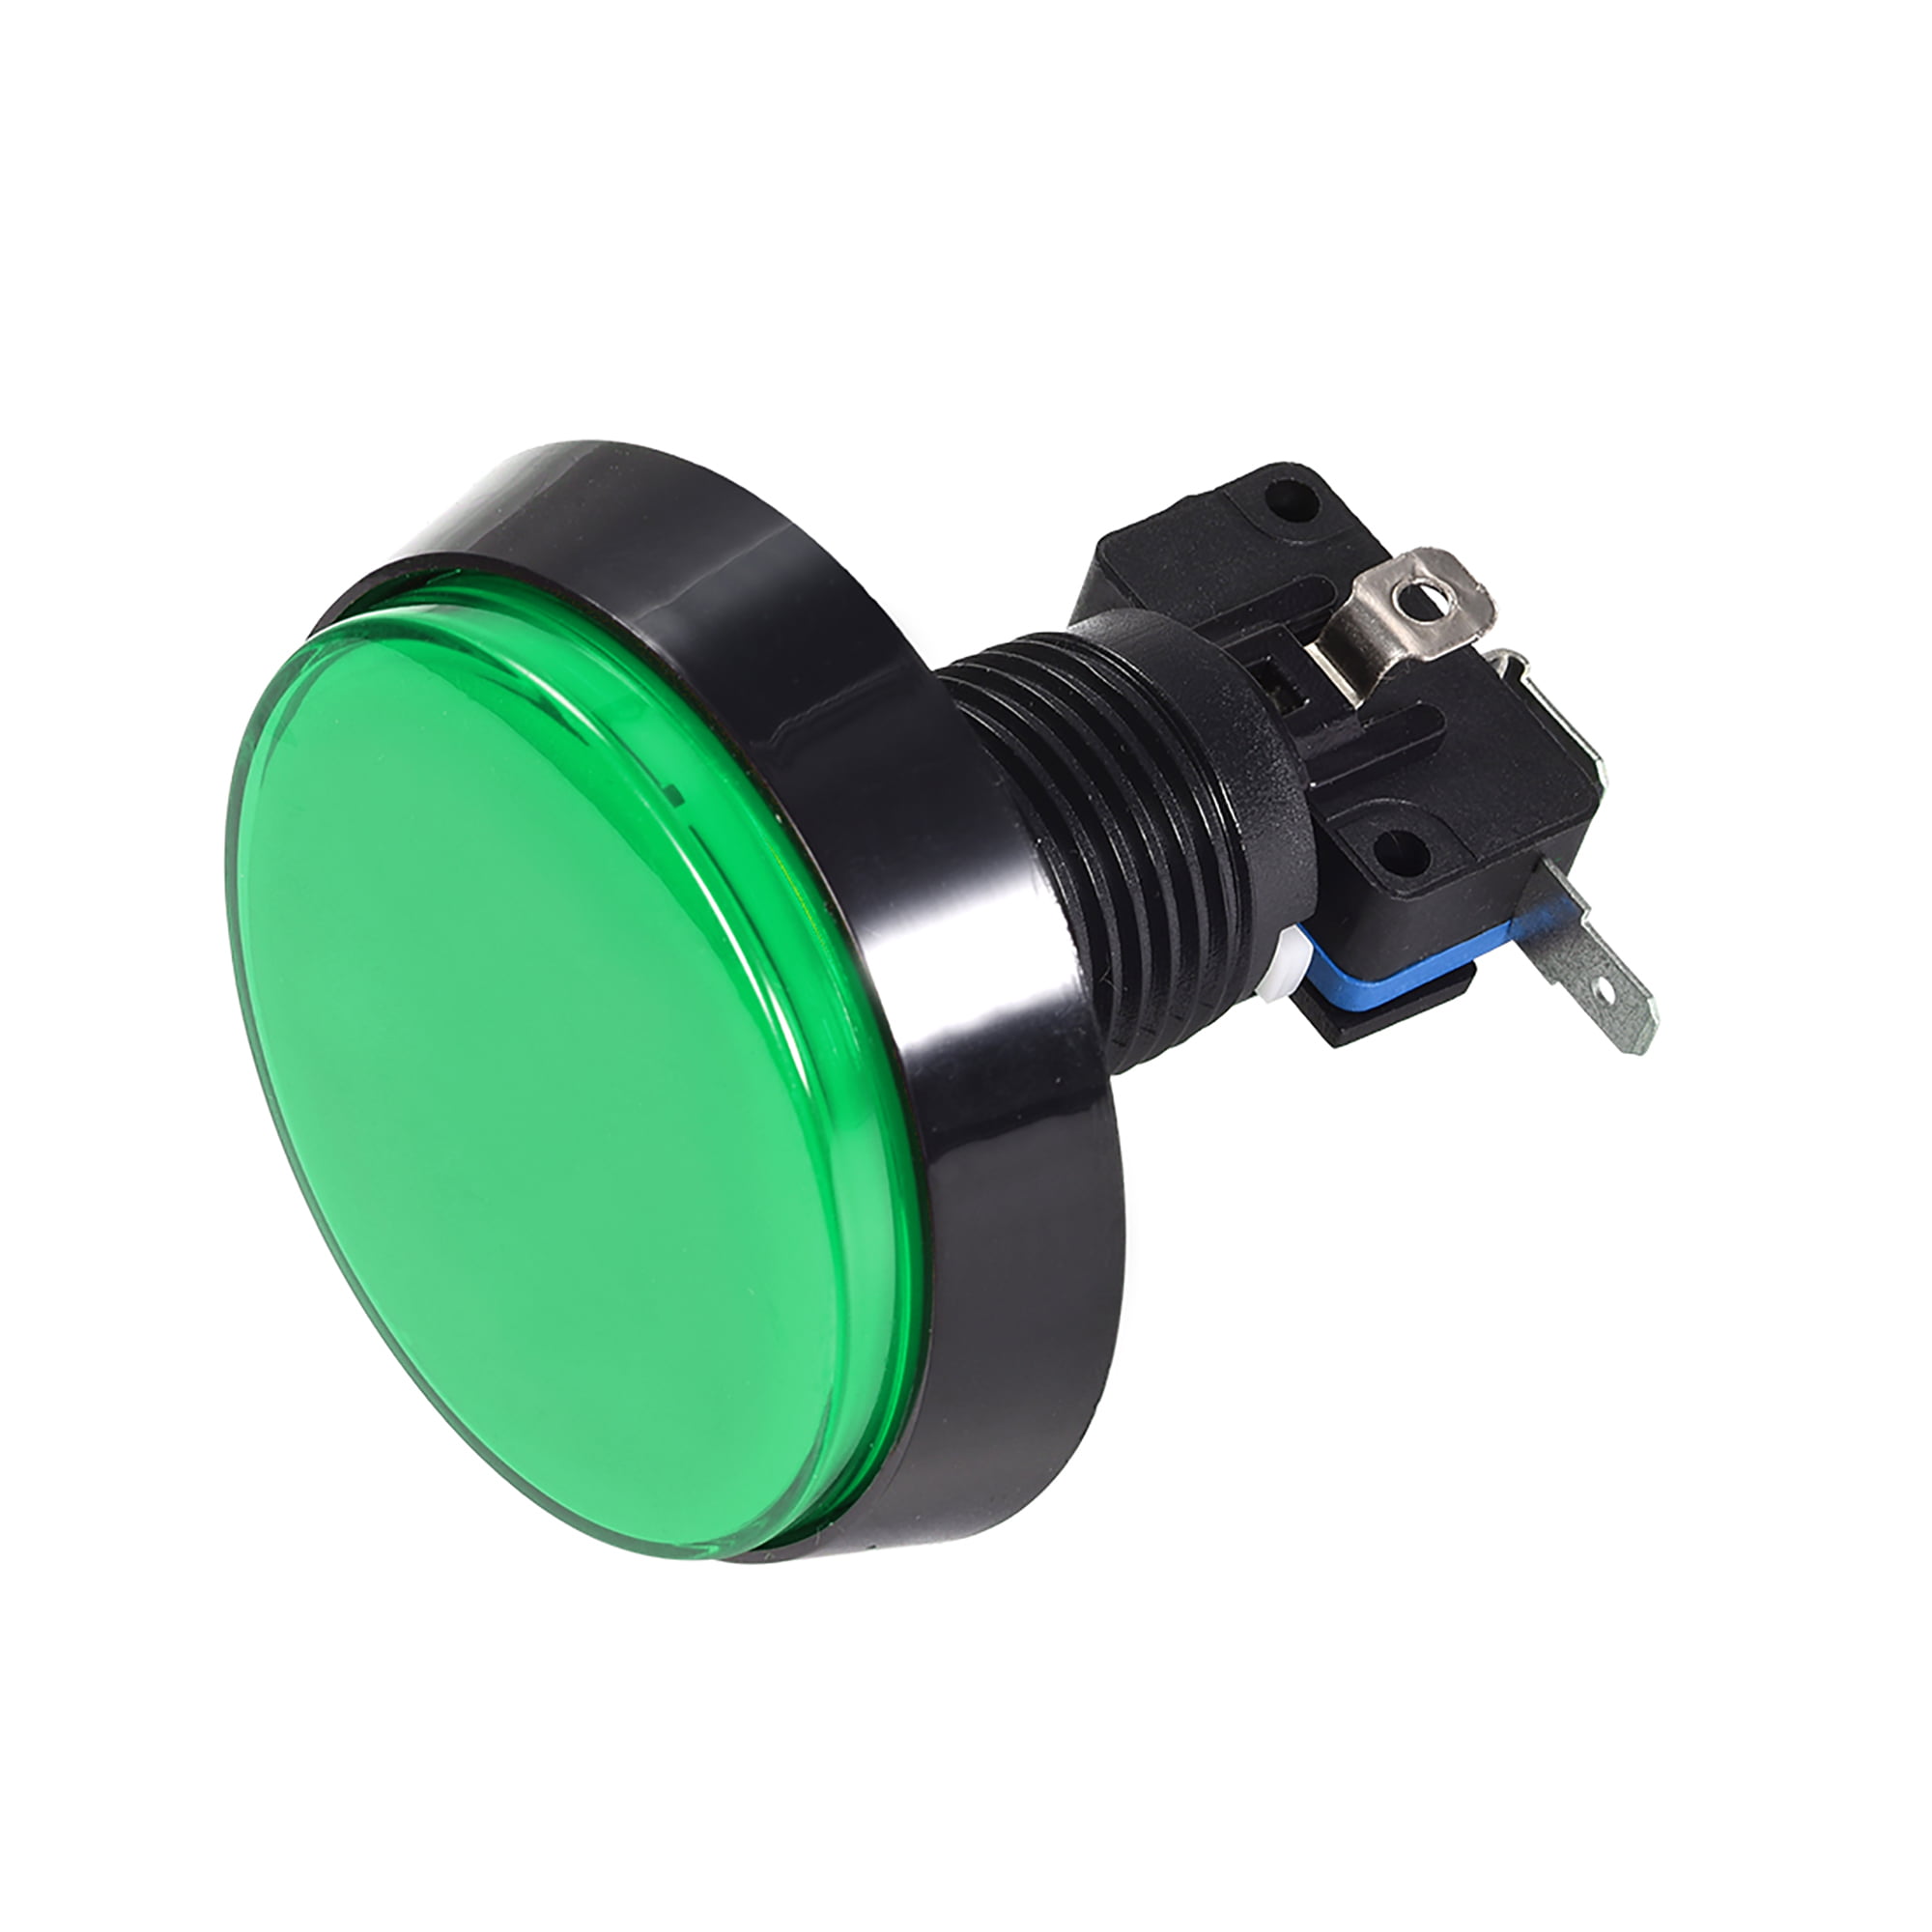 uxcell Game Push Button 60mm Round 12V LED Illuminated Push Button Switch with Micro Switch for Arcade Video Games Green 1pcs